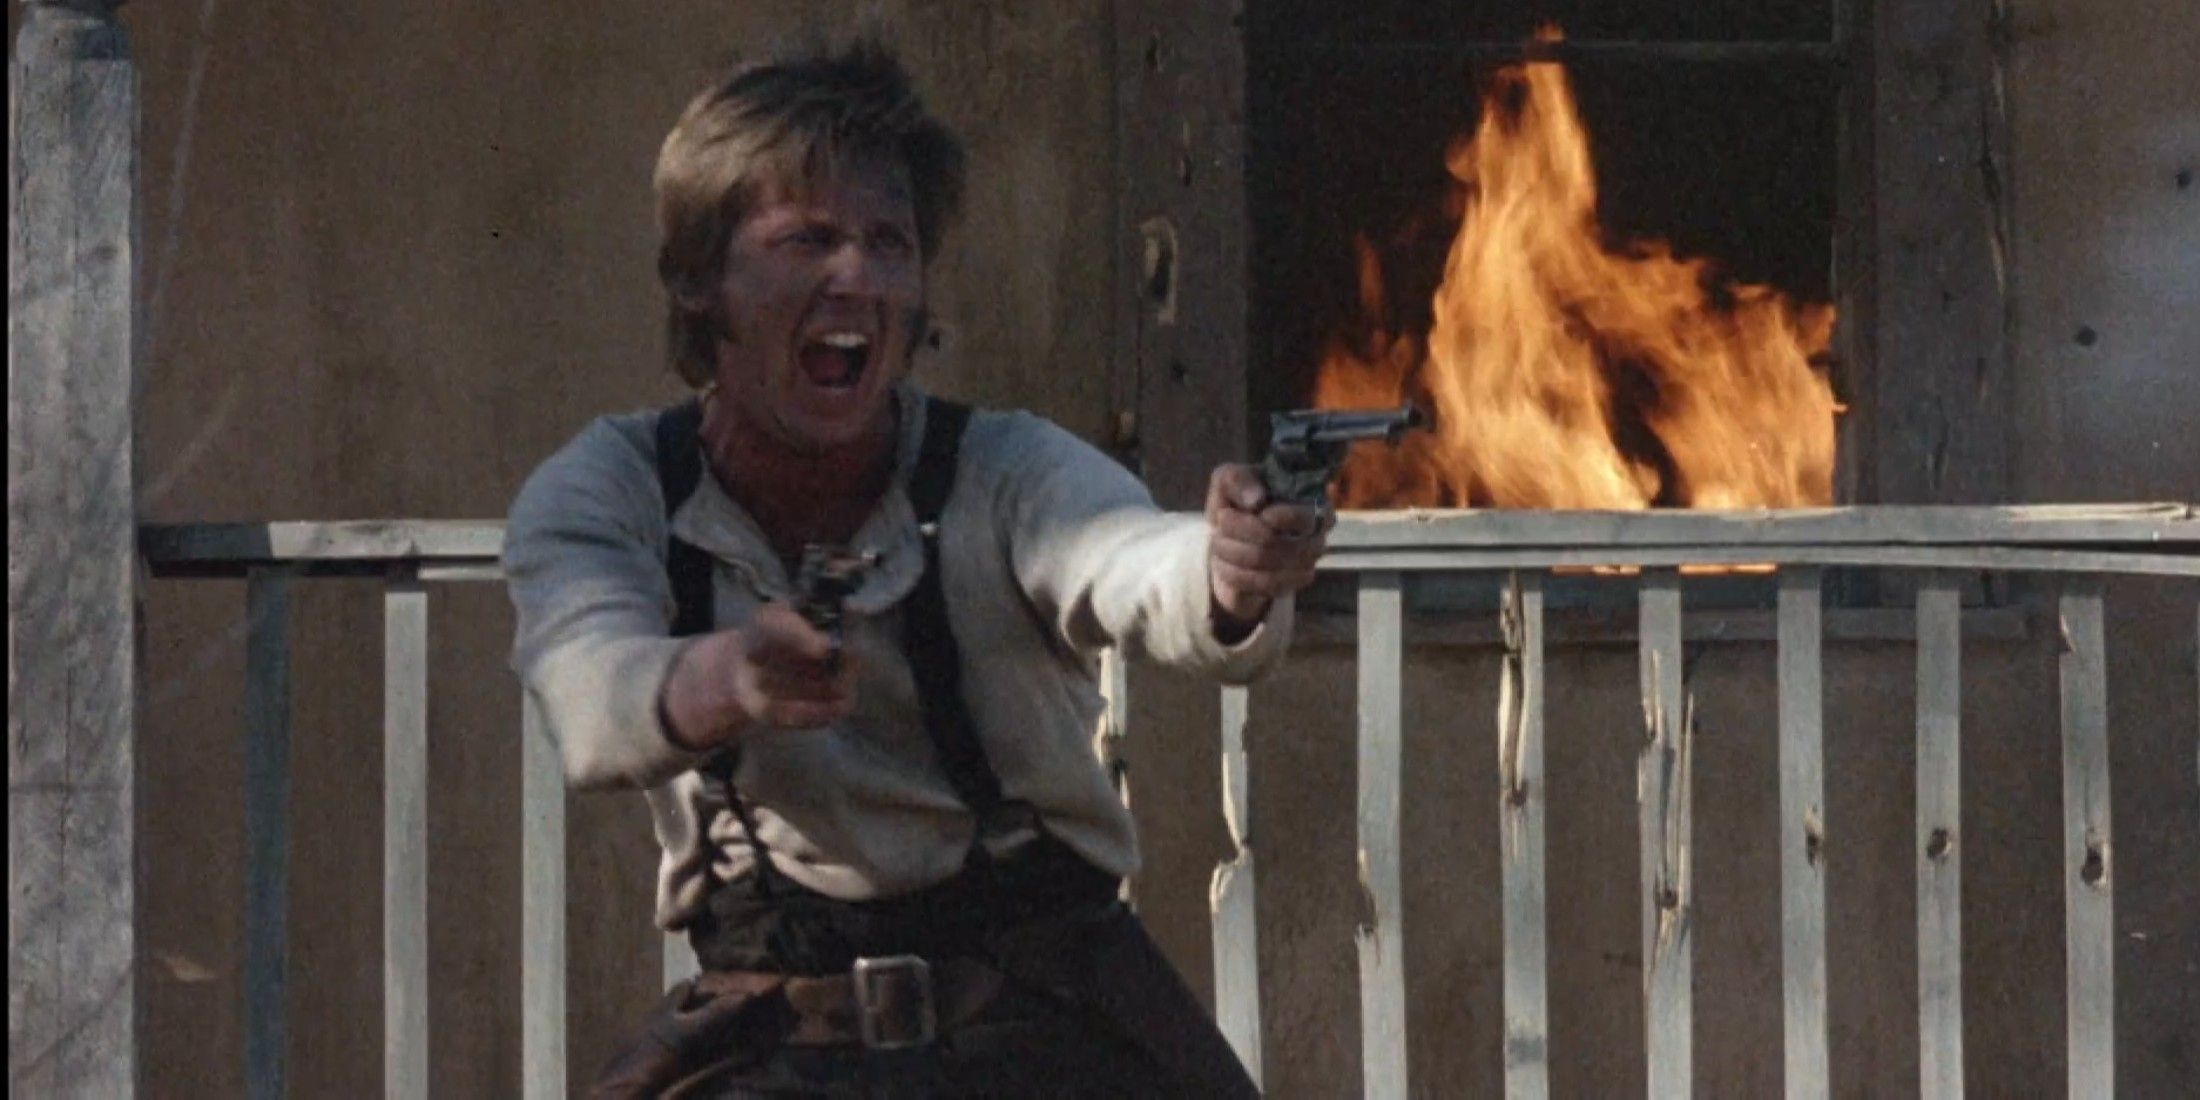 Emilio Estevez as Billy the Kid firing two guns outside a burning house in Young Guns